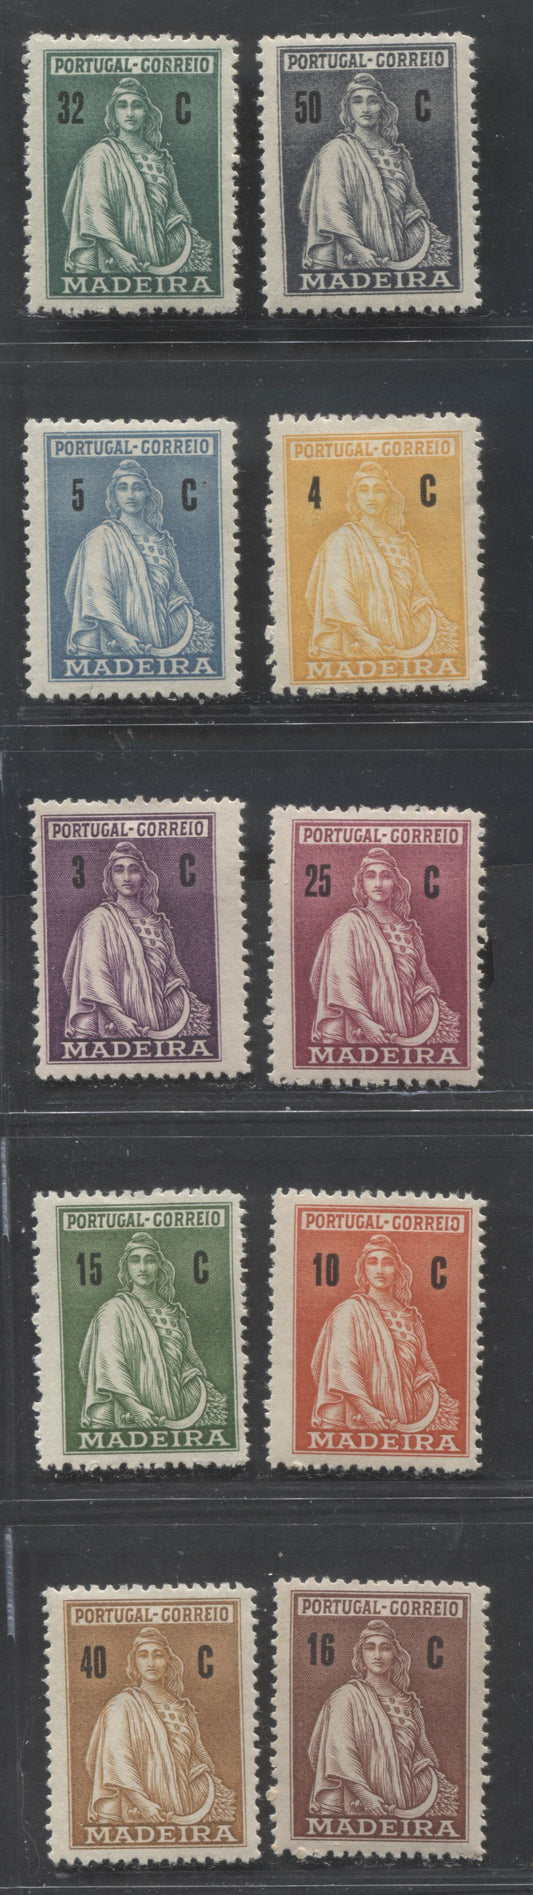 Madiera SC#45/55 1928 Ceres Definitives, 10 F/VFOG Singles, Click on Listing to See ALL Pictures, Estimated Value $6